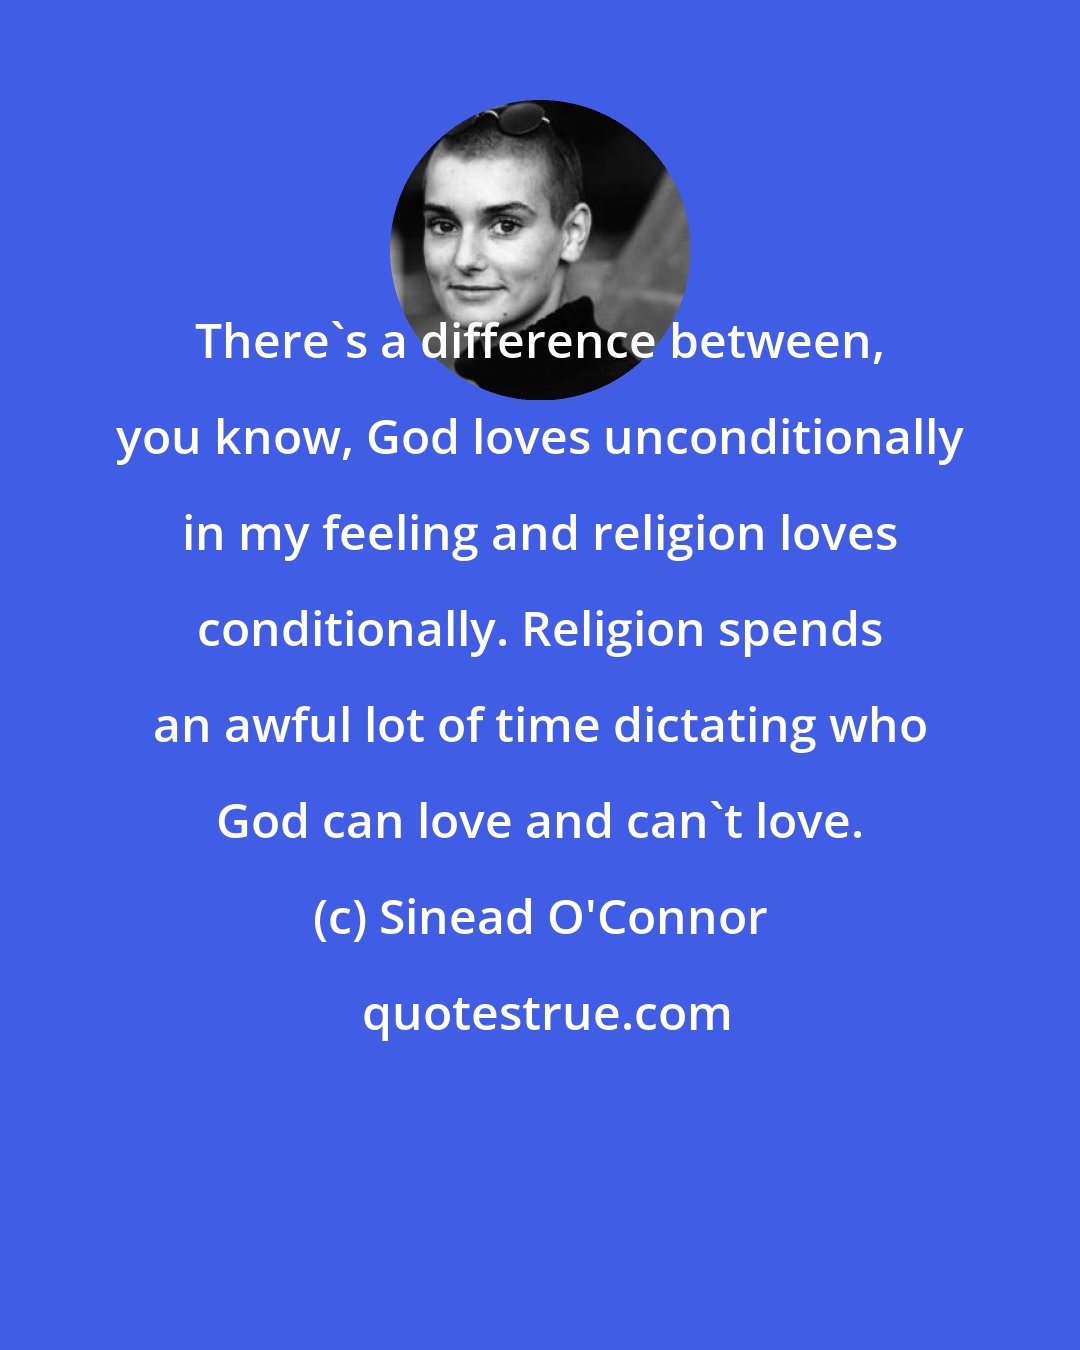 Sinead O'Connor: There's a difference between, you know, God loves unconditionally in my feeling and religion loves conditionally. Religion spends an awful lot of time dictating who God can love and can't love.